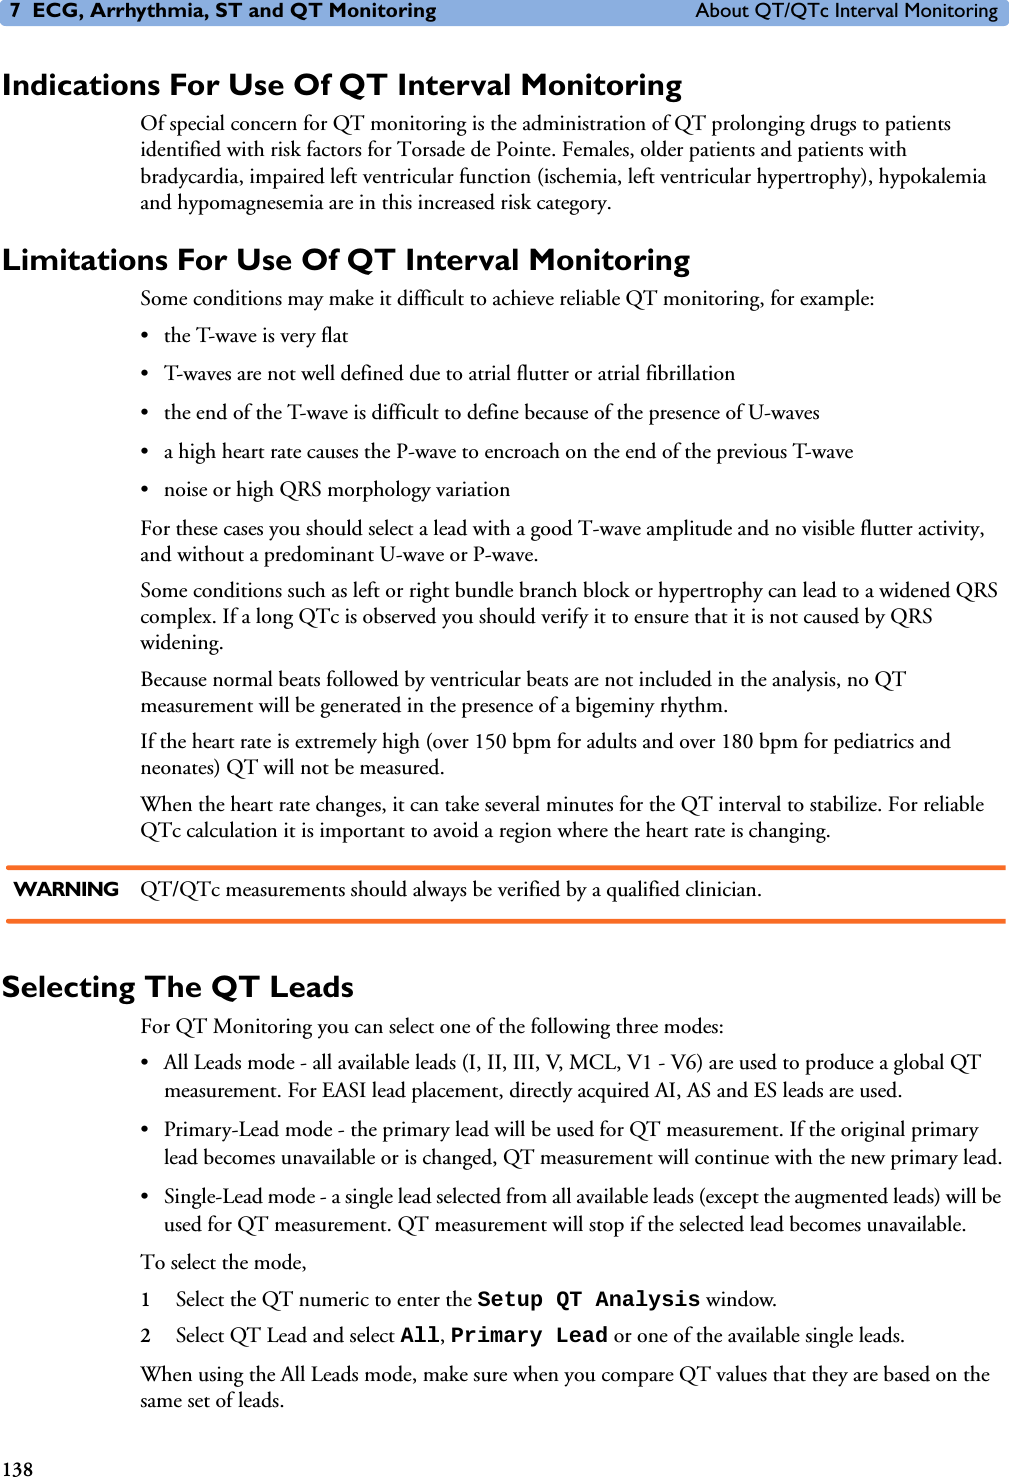 7 ECG, Arrhythmia, ST and QT Monitoring About QT/QTc Interval Monitoring138Indications For Use Of QT Interval MonitoringOf special concern for QT monitoring is the administration of QT prolonging drugs to patients identified with risk factors for Torsade de Pointe. Females, older patients and patients with bradycardia, impaired left ventricular function (ischemia, left ventricular hypertrophy), hypokalemia and hypomagnesemia are in this increased risk category. Limitations For Use Of QT Interval MonitoringSome conditions may make it difficult to achieve reliable QT monitoring, for example: • the T-wave is very flat• T-waves are not well defined due to atrial flutter or atrial fibrillation• the end of the T-wave is difficult to define because of the presence of U-waves• a high heart rate causes the P-wave to encroach on the end of the previous T-wave• noise or high QRS morphology variationFor these cases you should select a lead with a good T-wave amplitude and no visible flutter activity, and without a predominant U-wave or P-wave. Some conditions such as left or right bundle branch block or hypertrophy can lead to a widened QRS complex. If a long QTc is observed you should verify it to ensure that it is not caused by QRS widening.Because normal beats followed by ventricular beats are not included in the analysis, no QT measurement will be generated in the presence of a bigeminy rhythm. If the heart rate is extremely high (over 150 bpm for adults and over 180 bpm for pediatrics and neonates) QT will not be measured. When the heart rate changes, it can take several minutes for the QT interval to stabilize. For reliable QTc calculation it is important to avoid a region where the heart rate is changing. WARNING QT/QTc measurements should always be verified by a qualified clinician.Selecting The QT LeadsFor QT Monitoring you can select one of the following three modes:• All Leads mode - all available leads (I, II, III, V, MCL, V1 - V6) are used to produce a global QT measurement. For EASI lead placement, directly acquired AI, AS and ES leads are used. • Primary-Lead mode - the primary lead will be used for QT measurement. If the original primary lead becomes unavailable or is changed, QT measurement will continue with the new primary lead.• Single-Lead mode - a single lead selected from all available leads (except the augmented leads) will be used for QT measurement. QT measurement will stop if the selected lead becomes unavailable. To select the mode, 1Select the QT numeric to enter the Setup QT Analysis window.2Select QT Lead and select All, Primary Lead or one of the available single leads.When using the All Leads mode, make sure when you compare QT values that they are based on the same set of leads. 